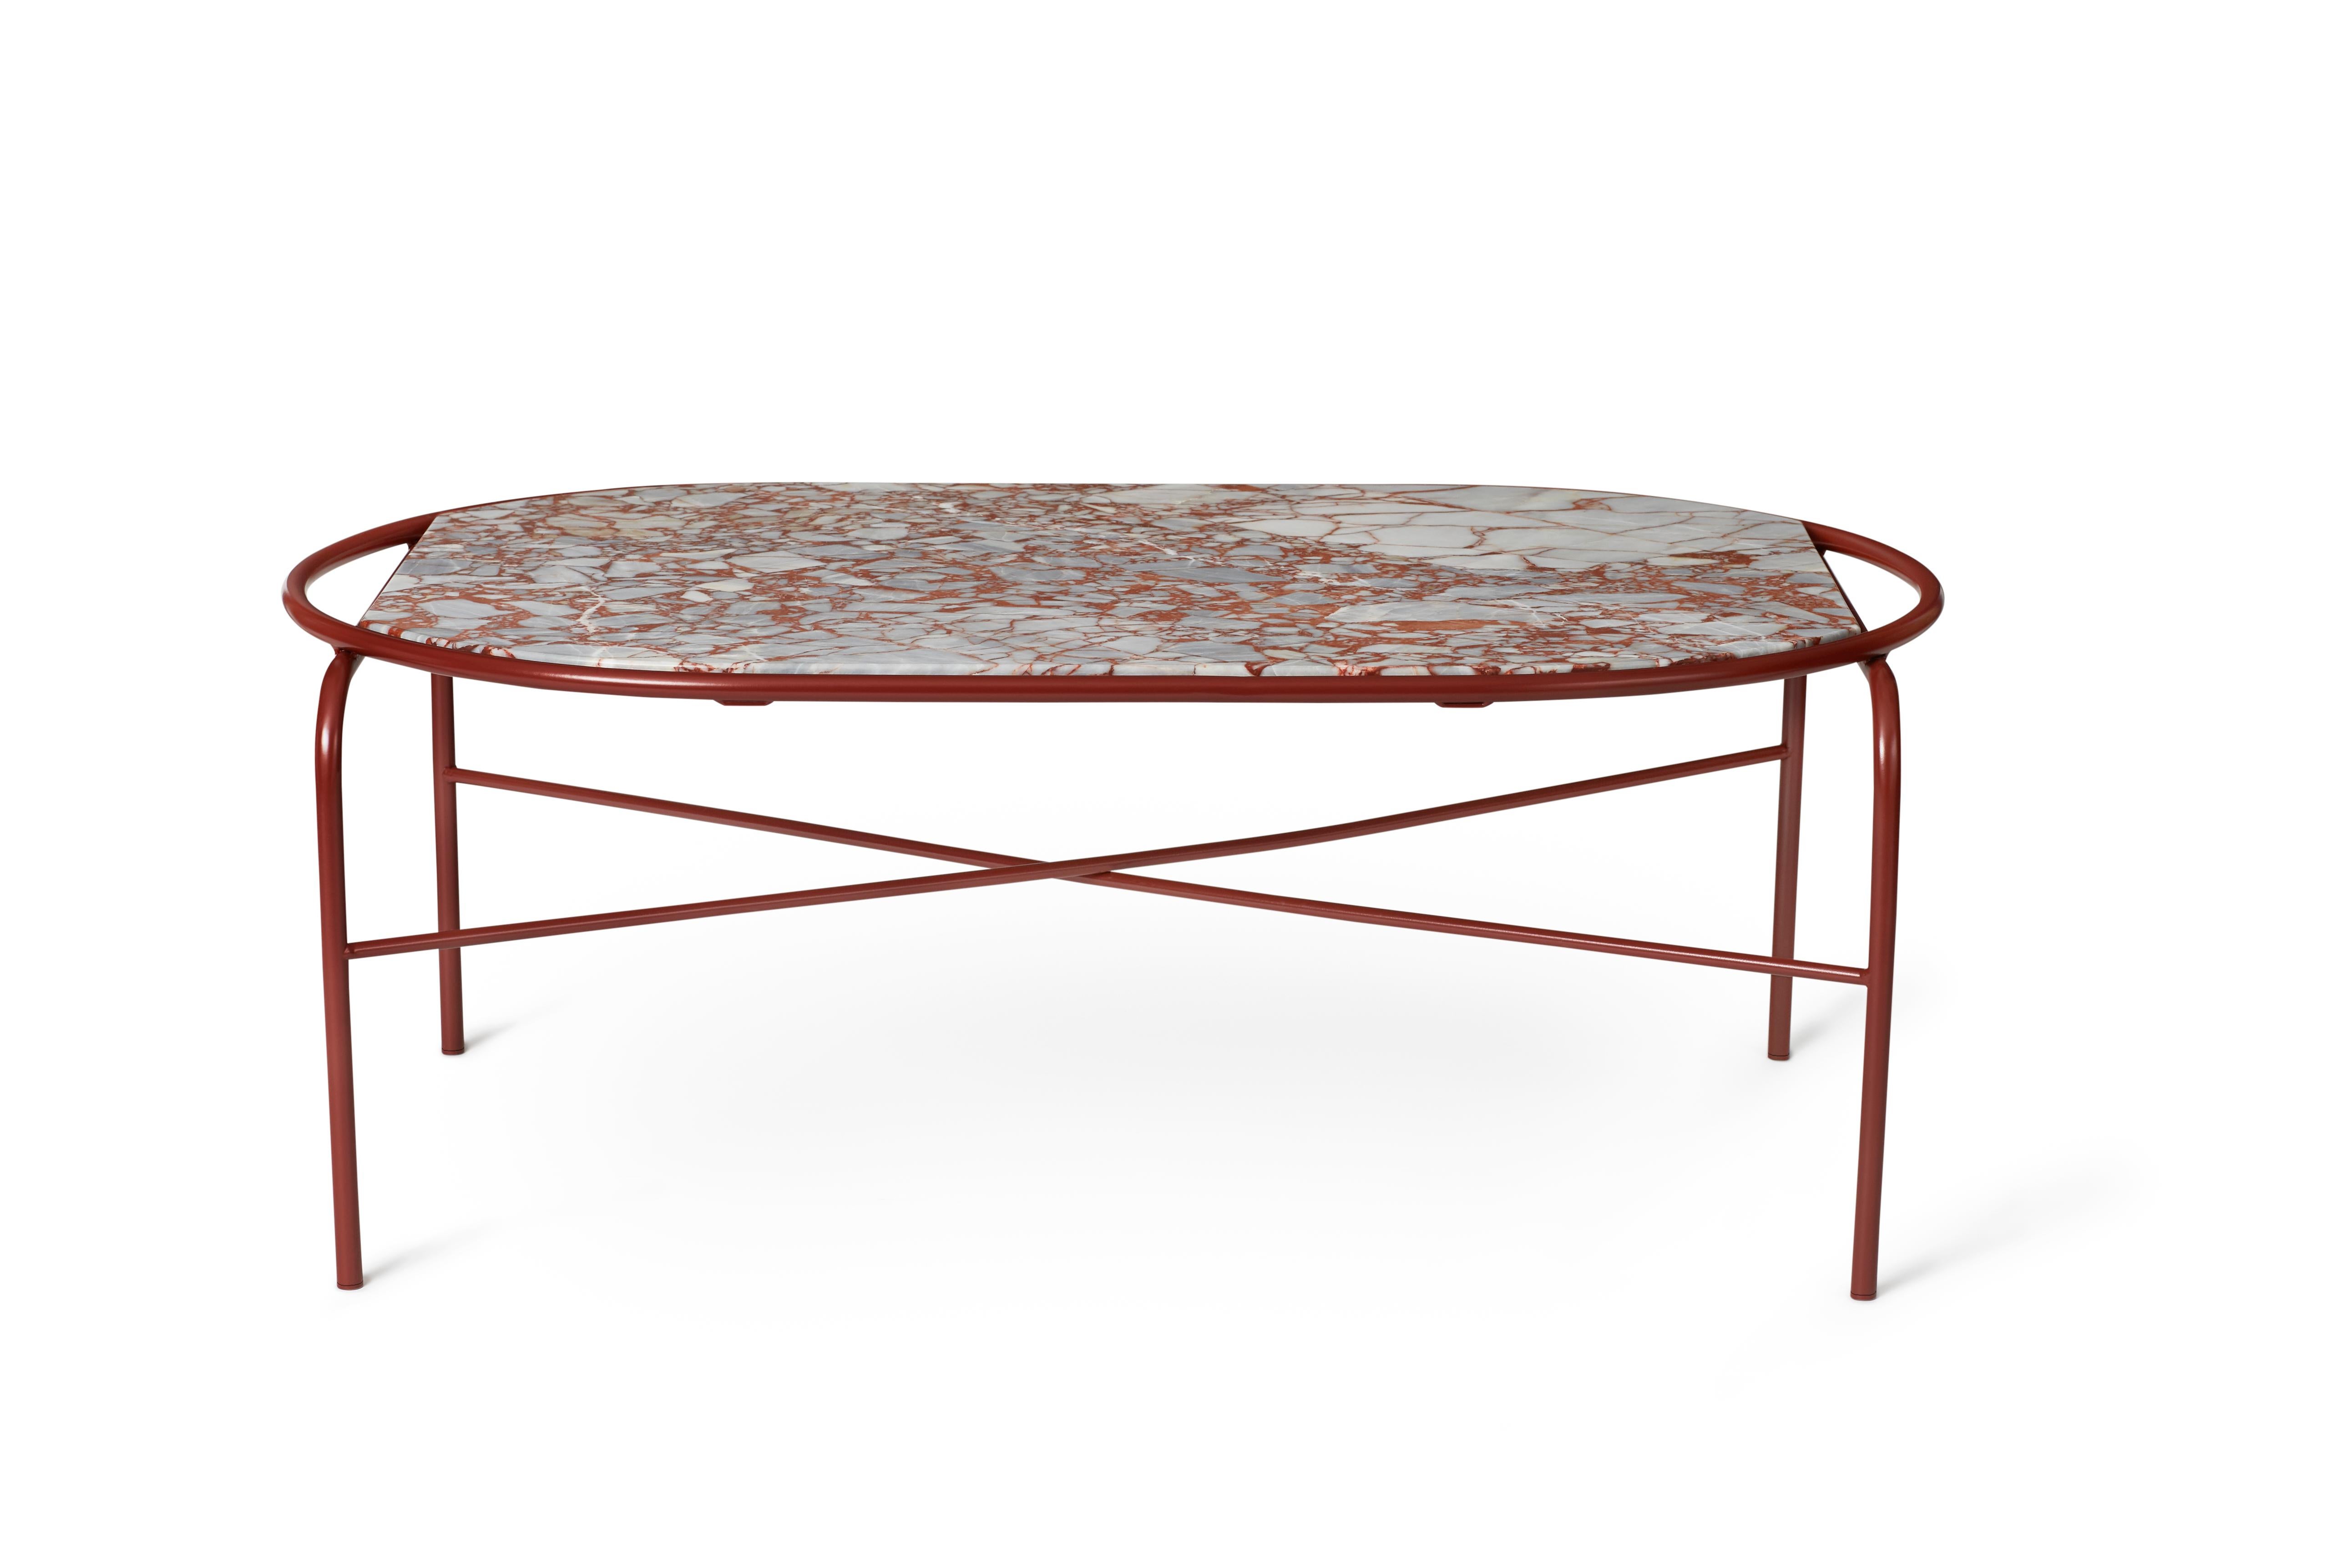 For Sale: Red (Marble red veined) Secant Oval Table in Steel Frame, by Sara Wright Polmar from Warm Nordic